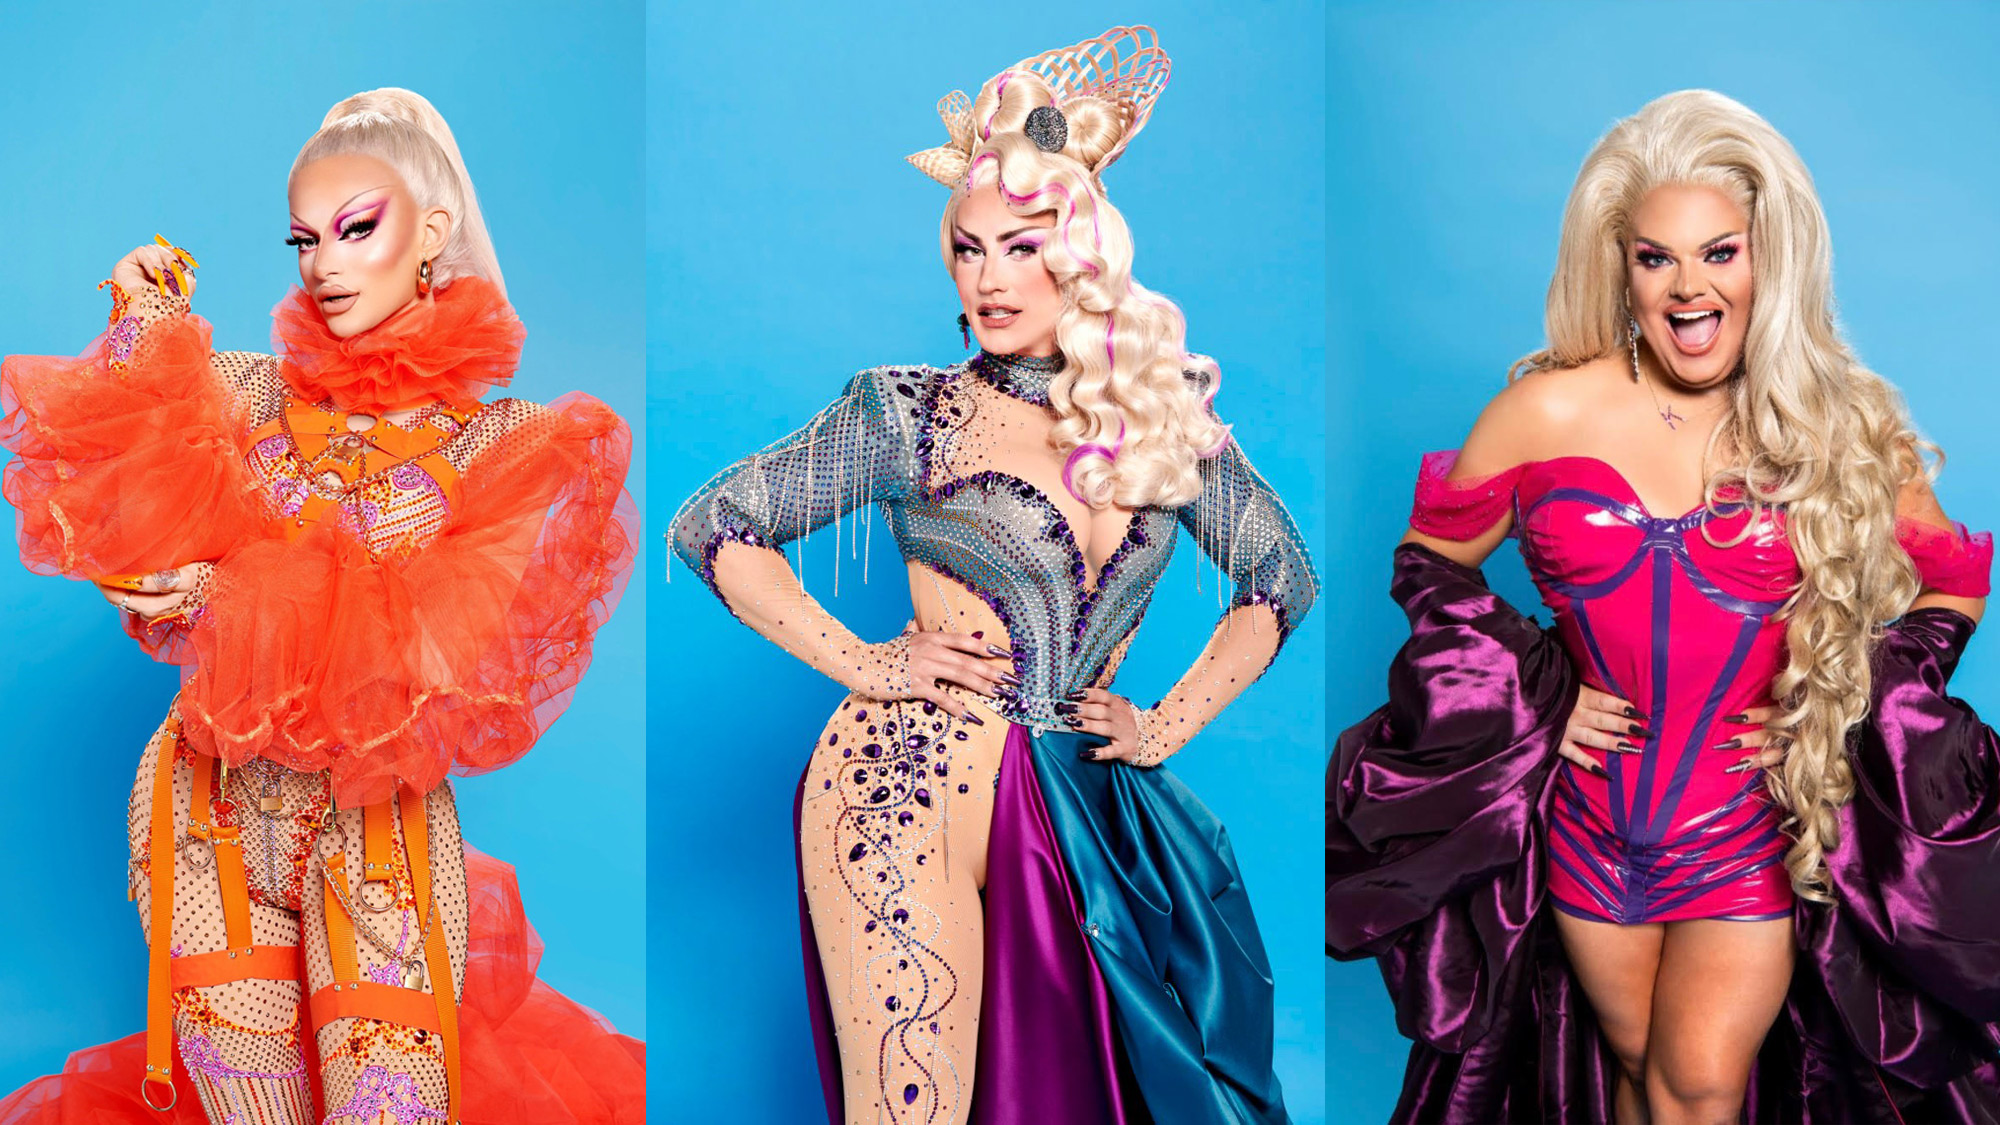 Watch RuPaul's Drag Race UK season 3 final online from the UK and